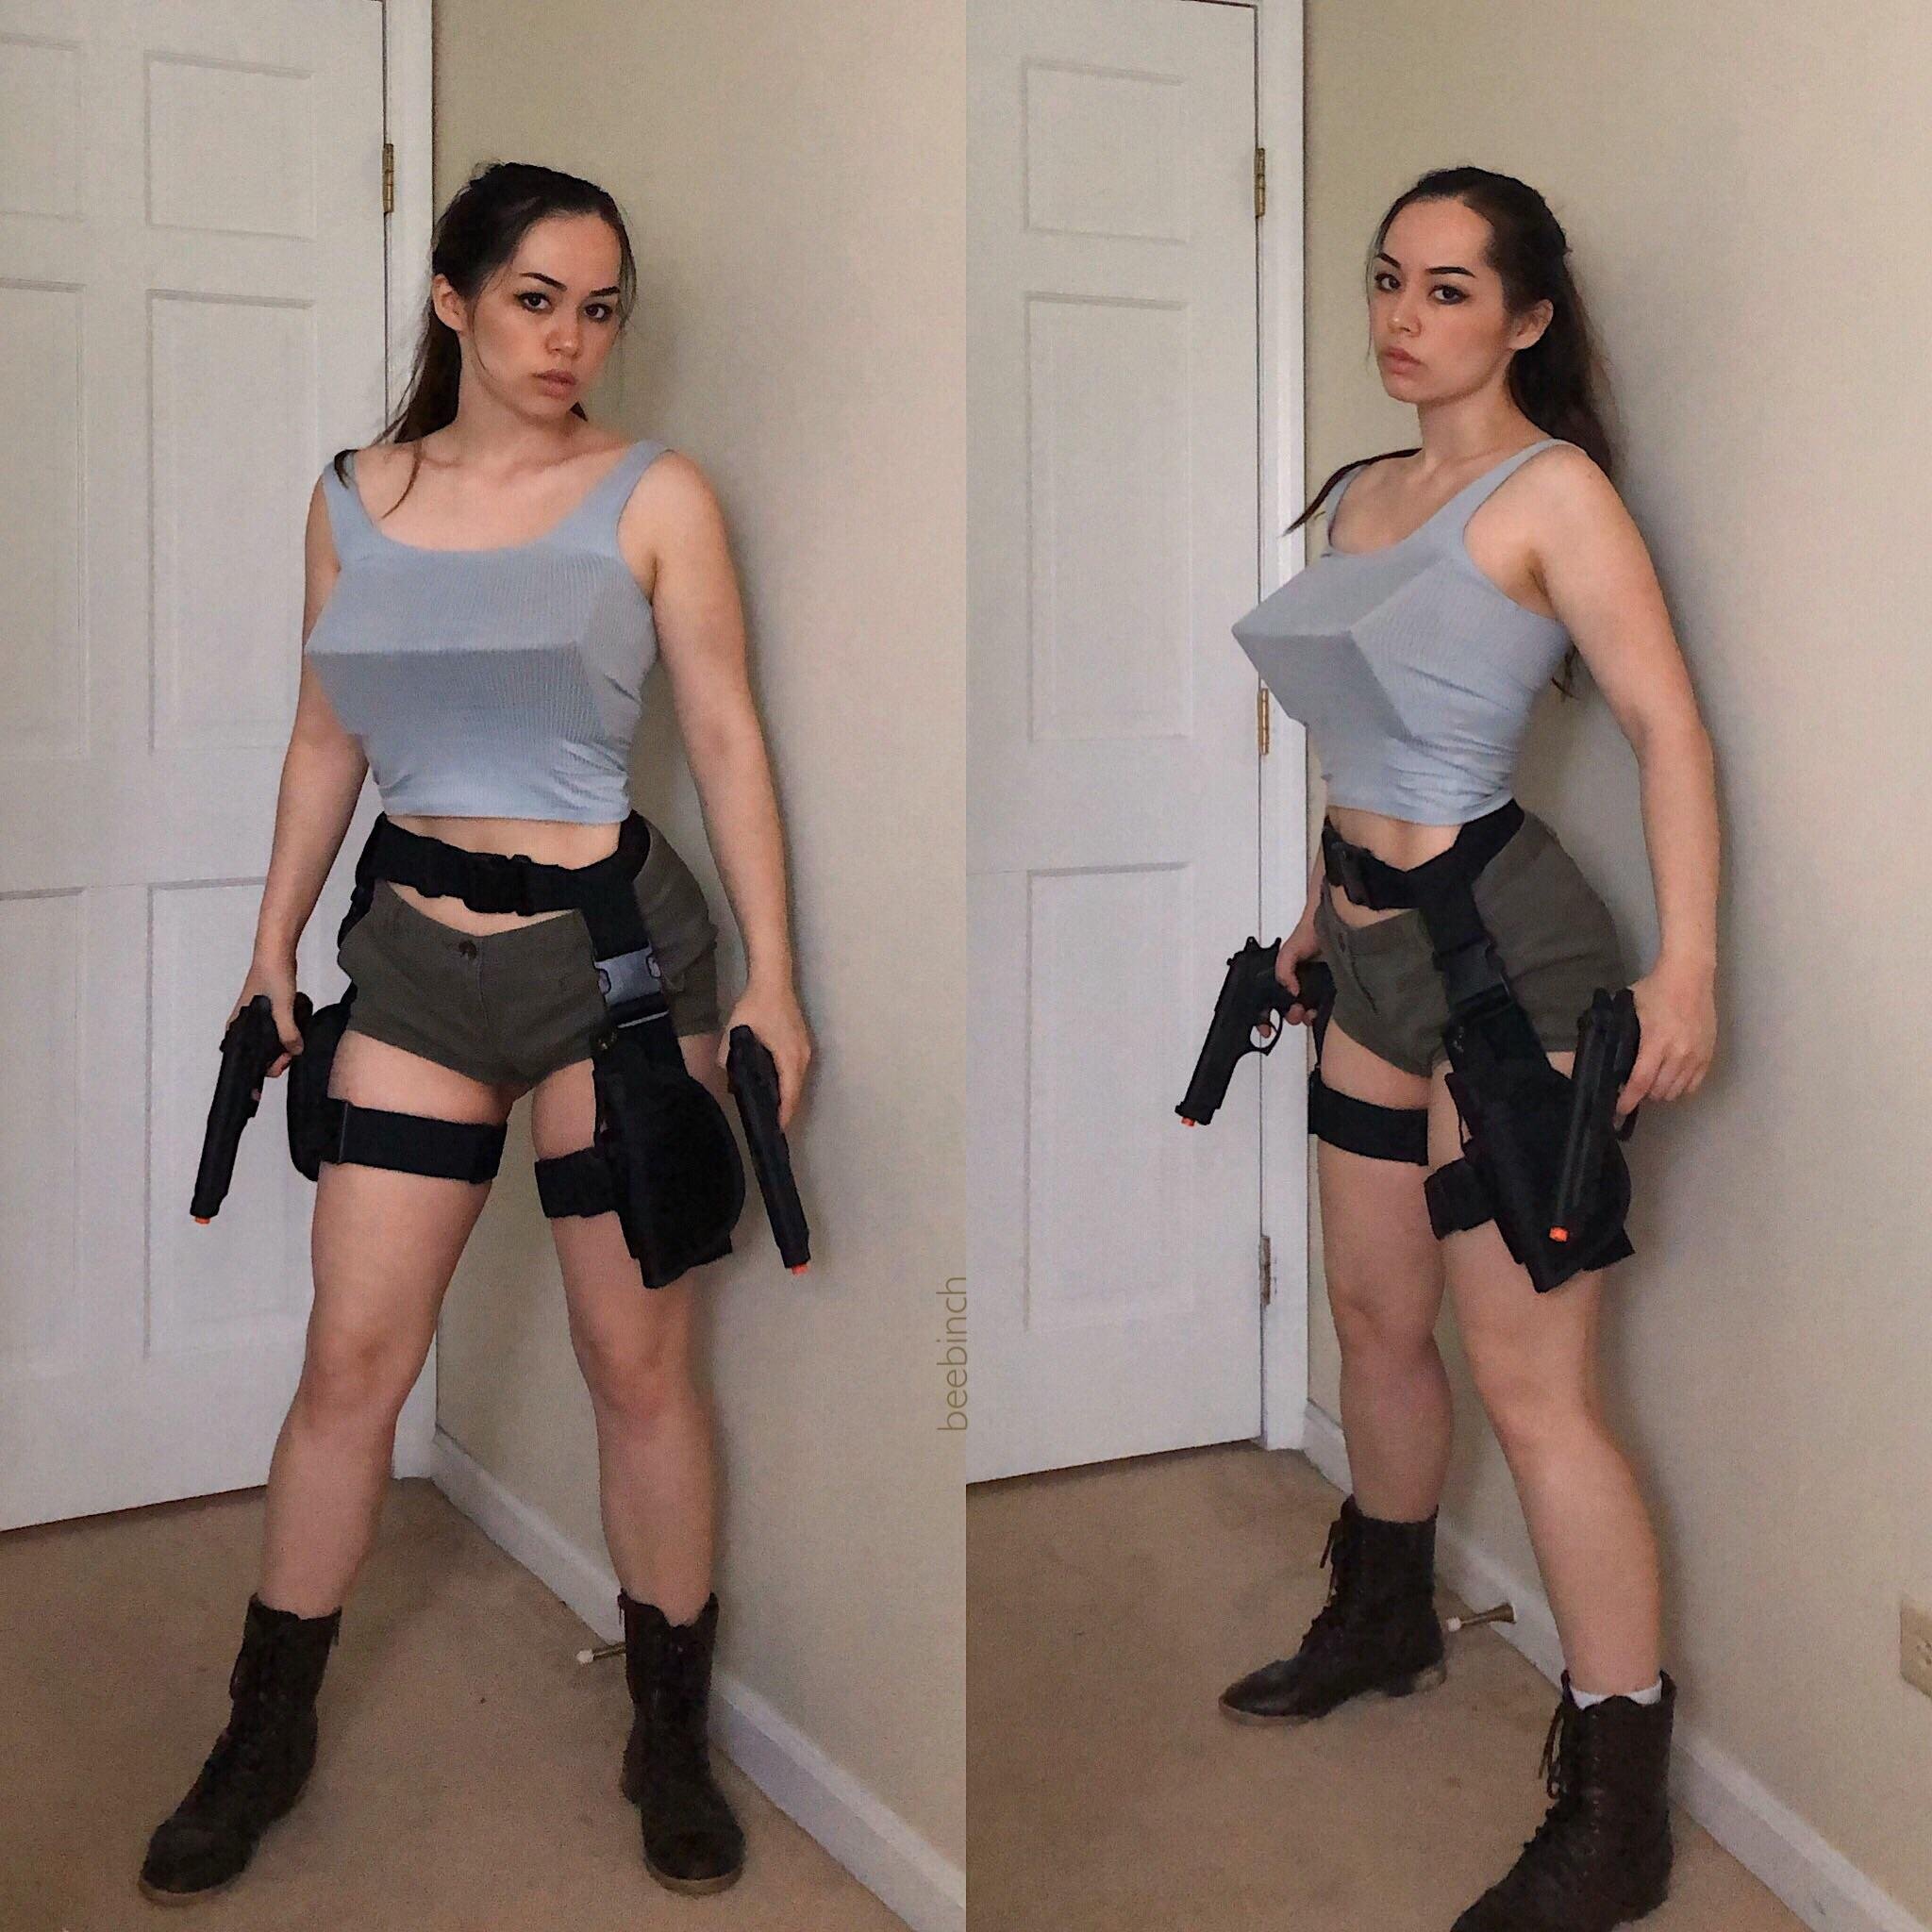 Tomb Raider Cosplay Is Accurate